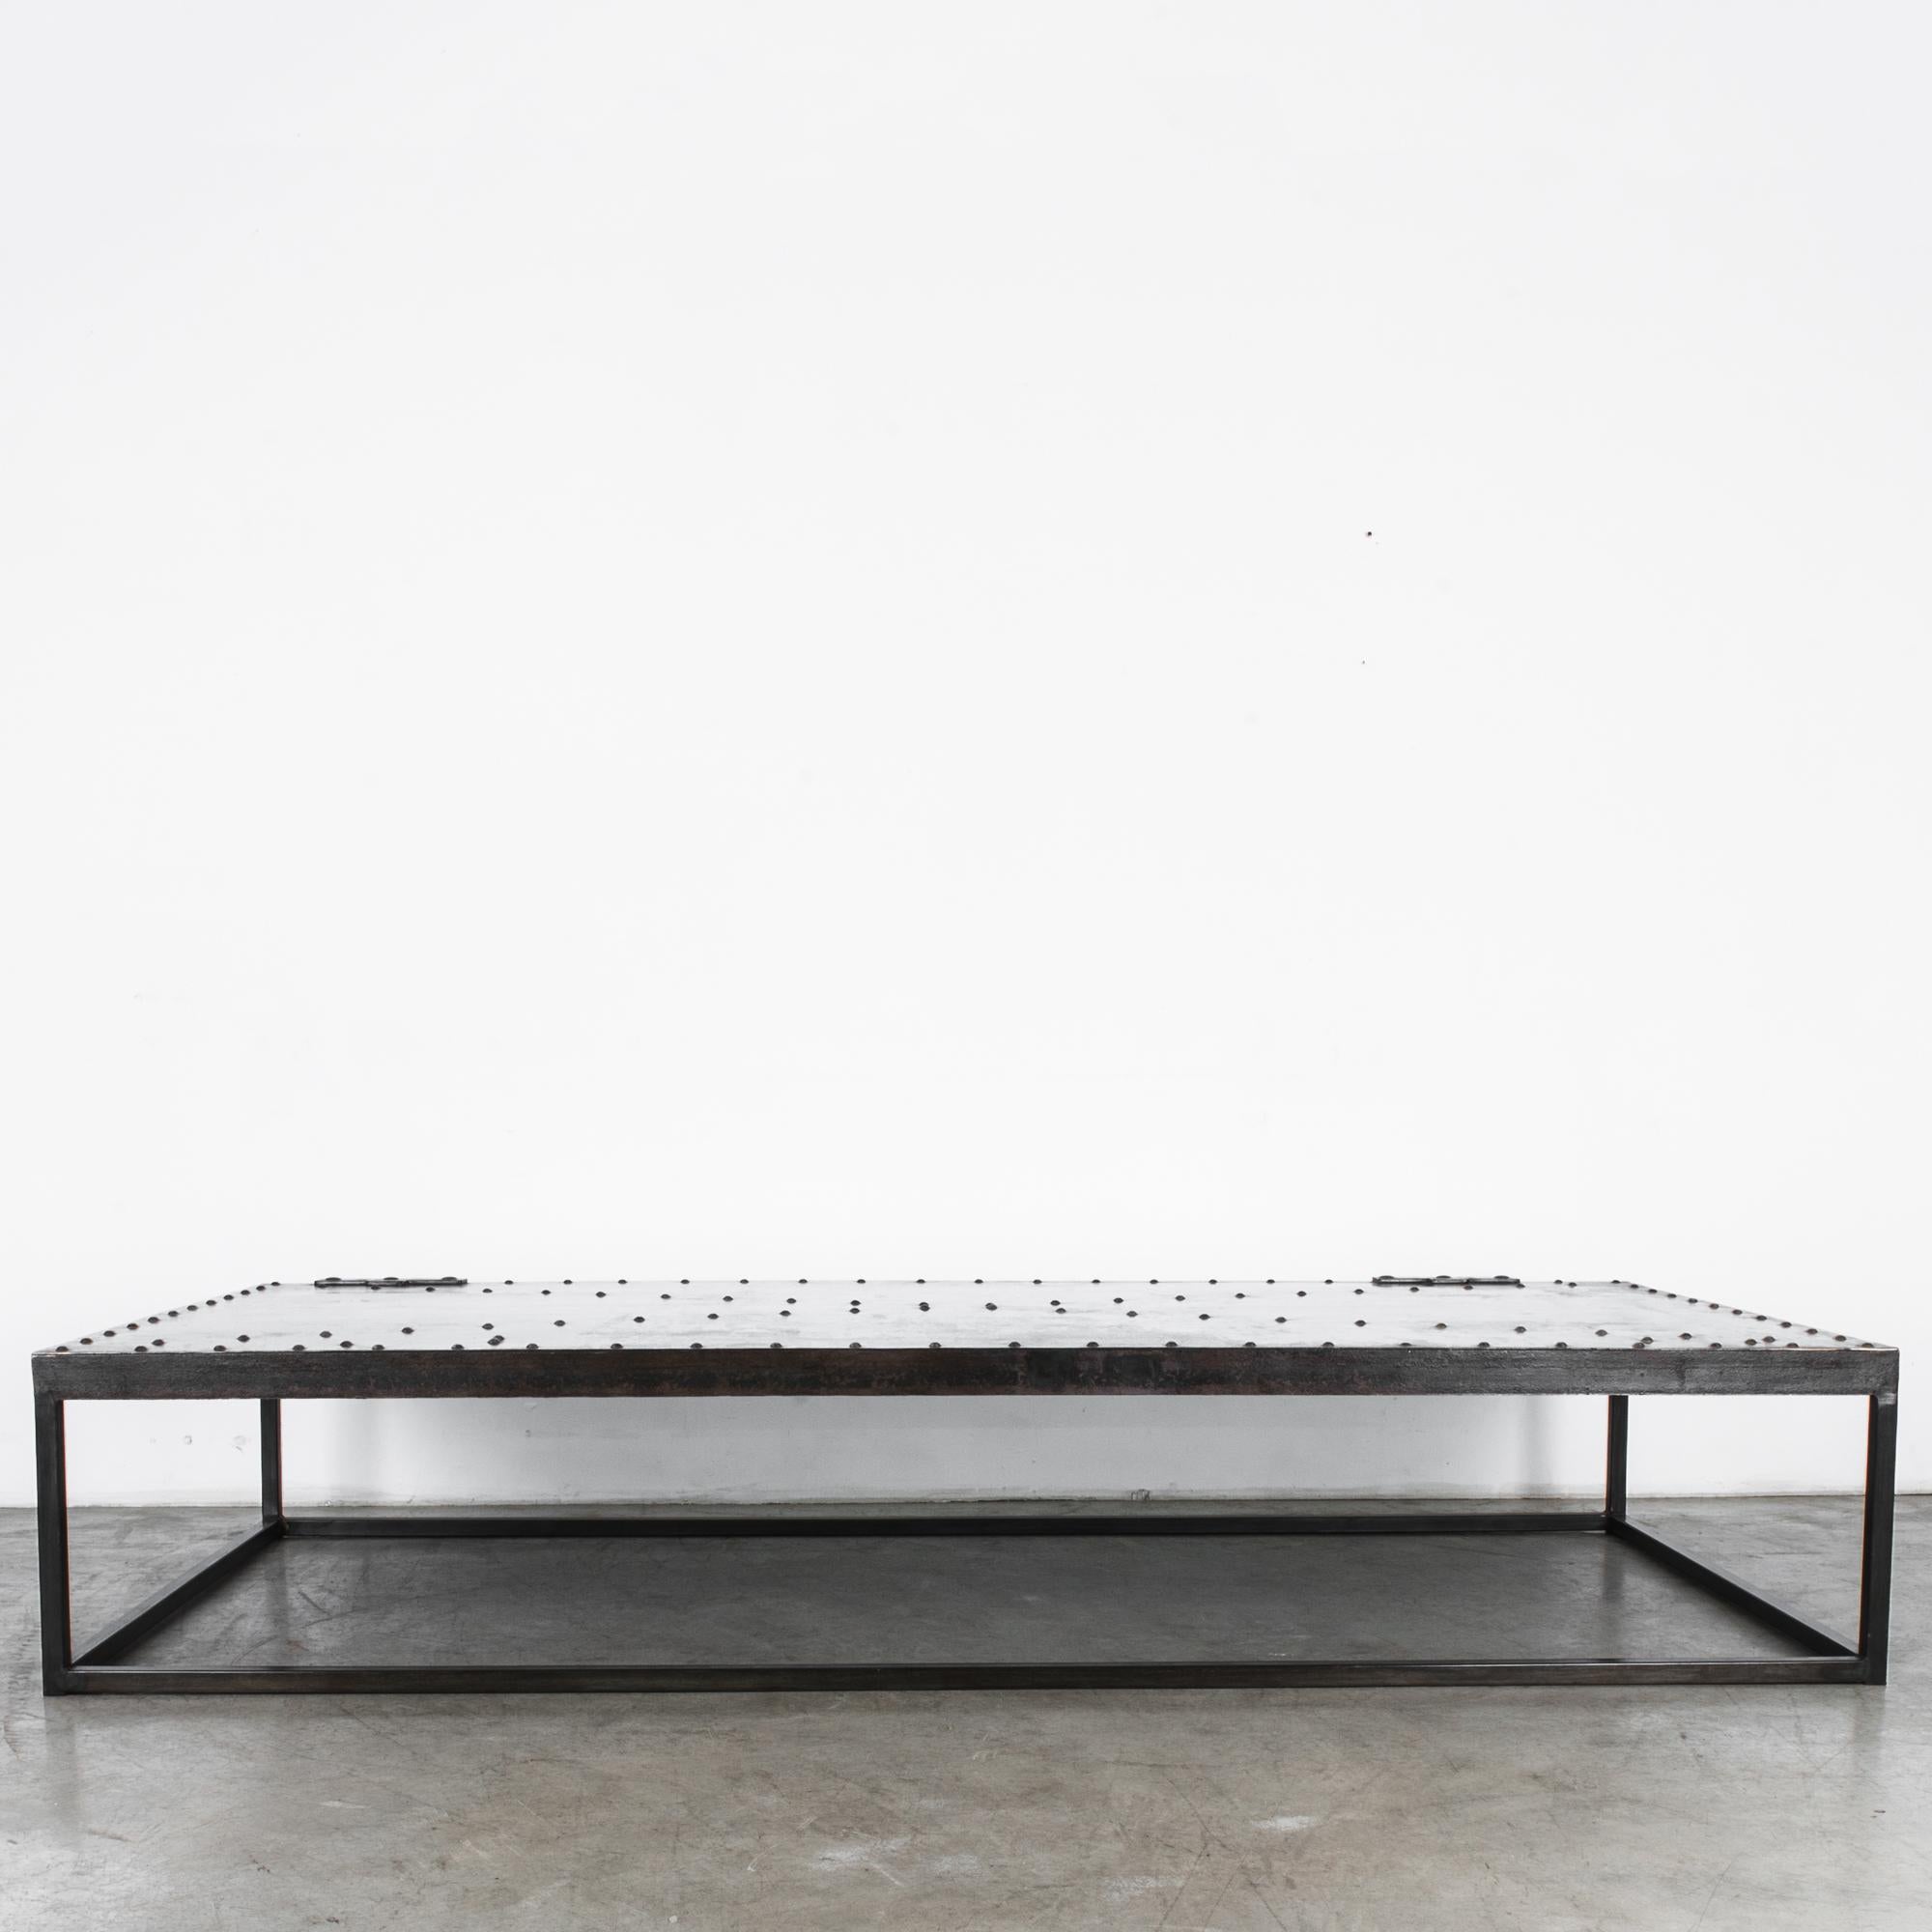 A reclaimed iron door from Central Europe circa 1900, transformed in our atelier into a stylish coffee table. Fixed to a minimal steel base, an intriguing architectural element becomes a stylish coffee table. Polished to a satin shine, this iron